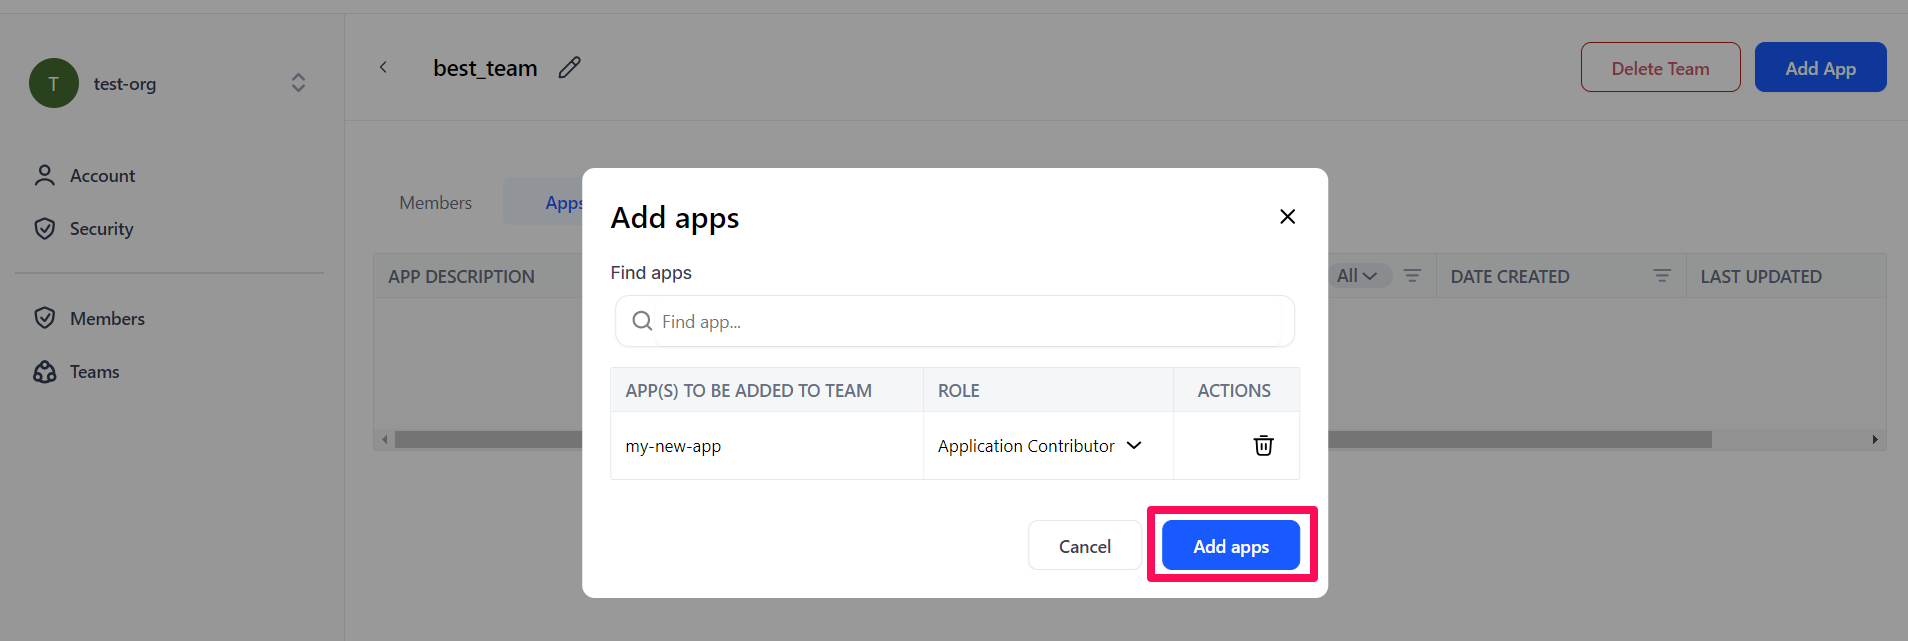 Add apps to your team